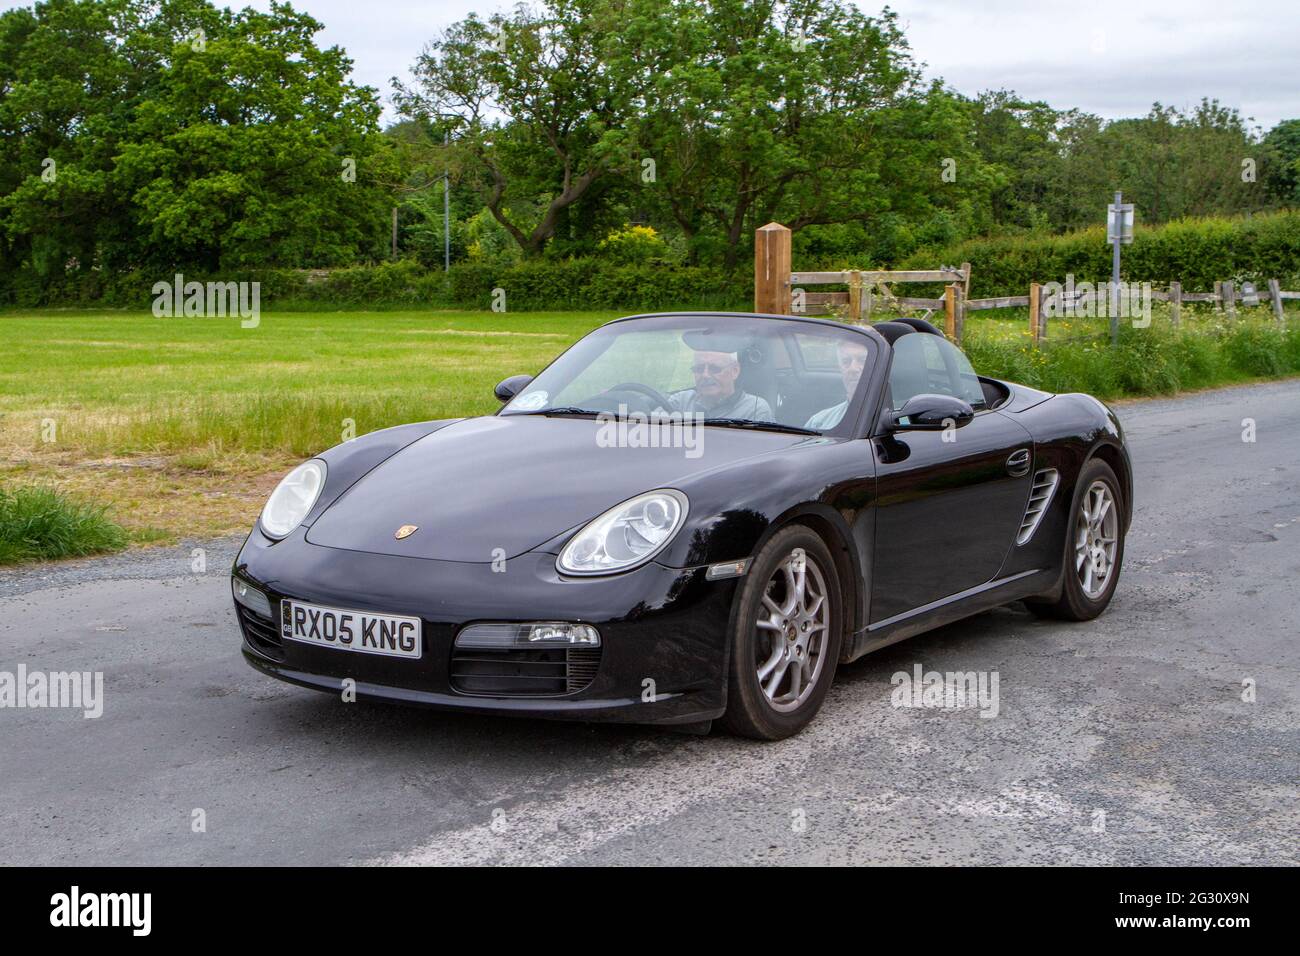 A Black Porsche Boxster Car Annual Manchester to Blackpool Vintage & Classic Car Run The event is a ‘Touring Assembly’ Stock Photo